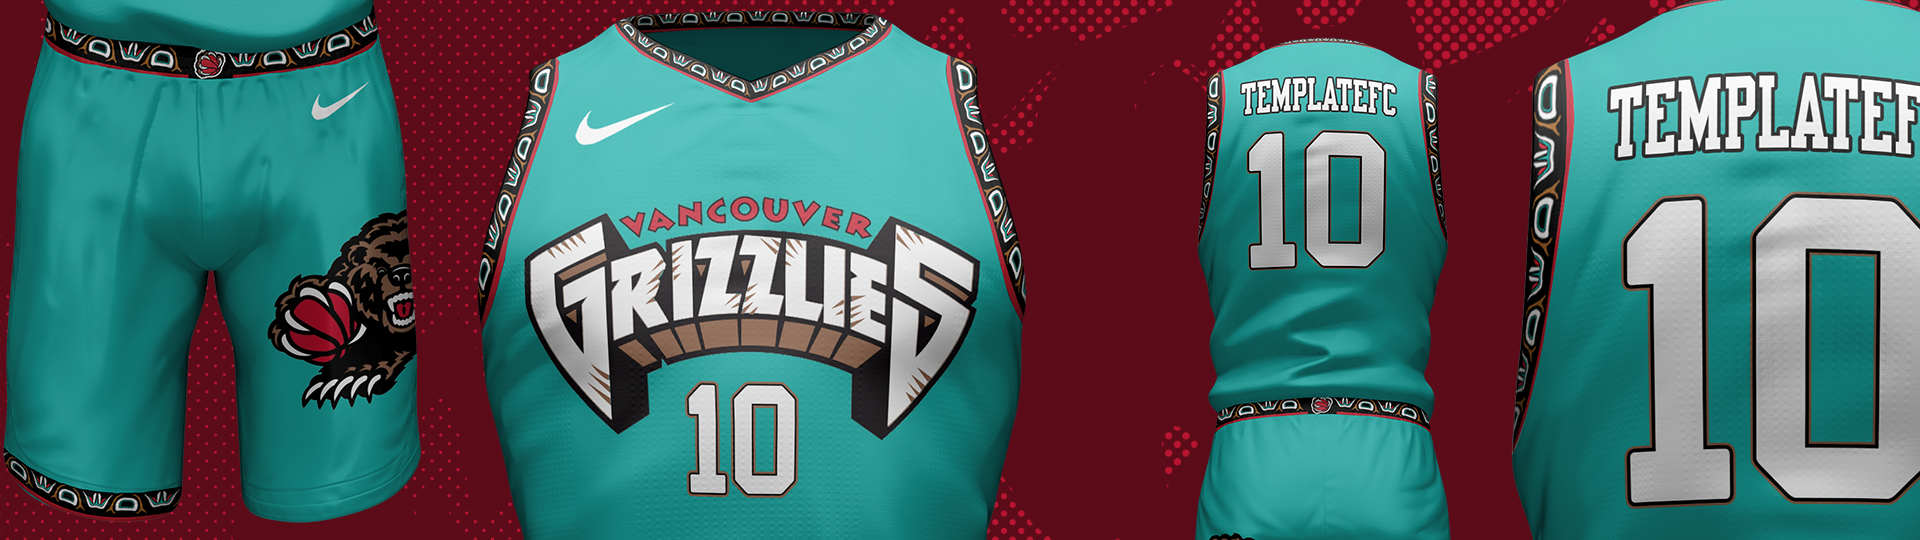 Download Basketball Full Jersey Template Mock-Up - Template FC